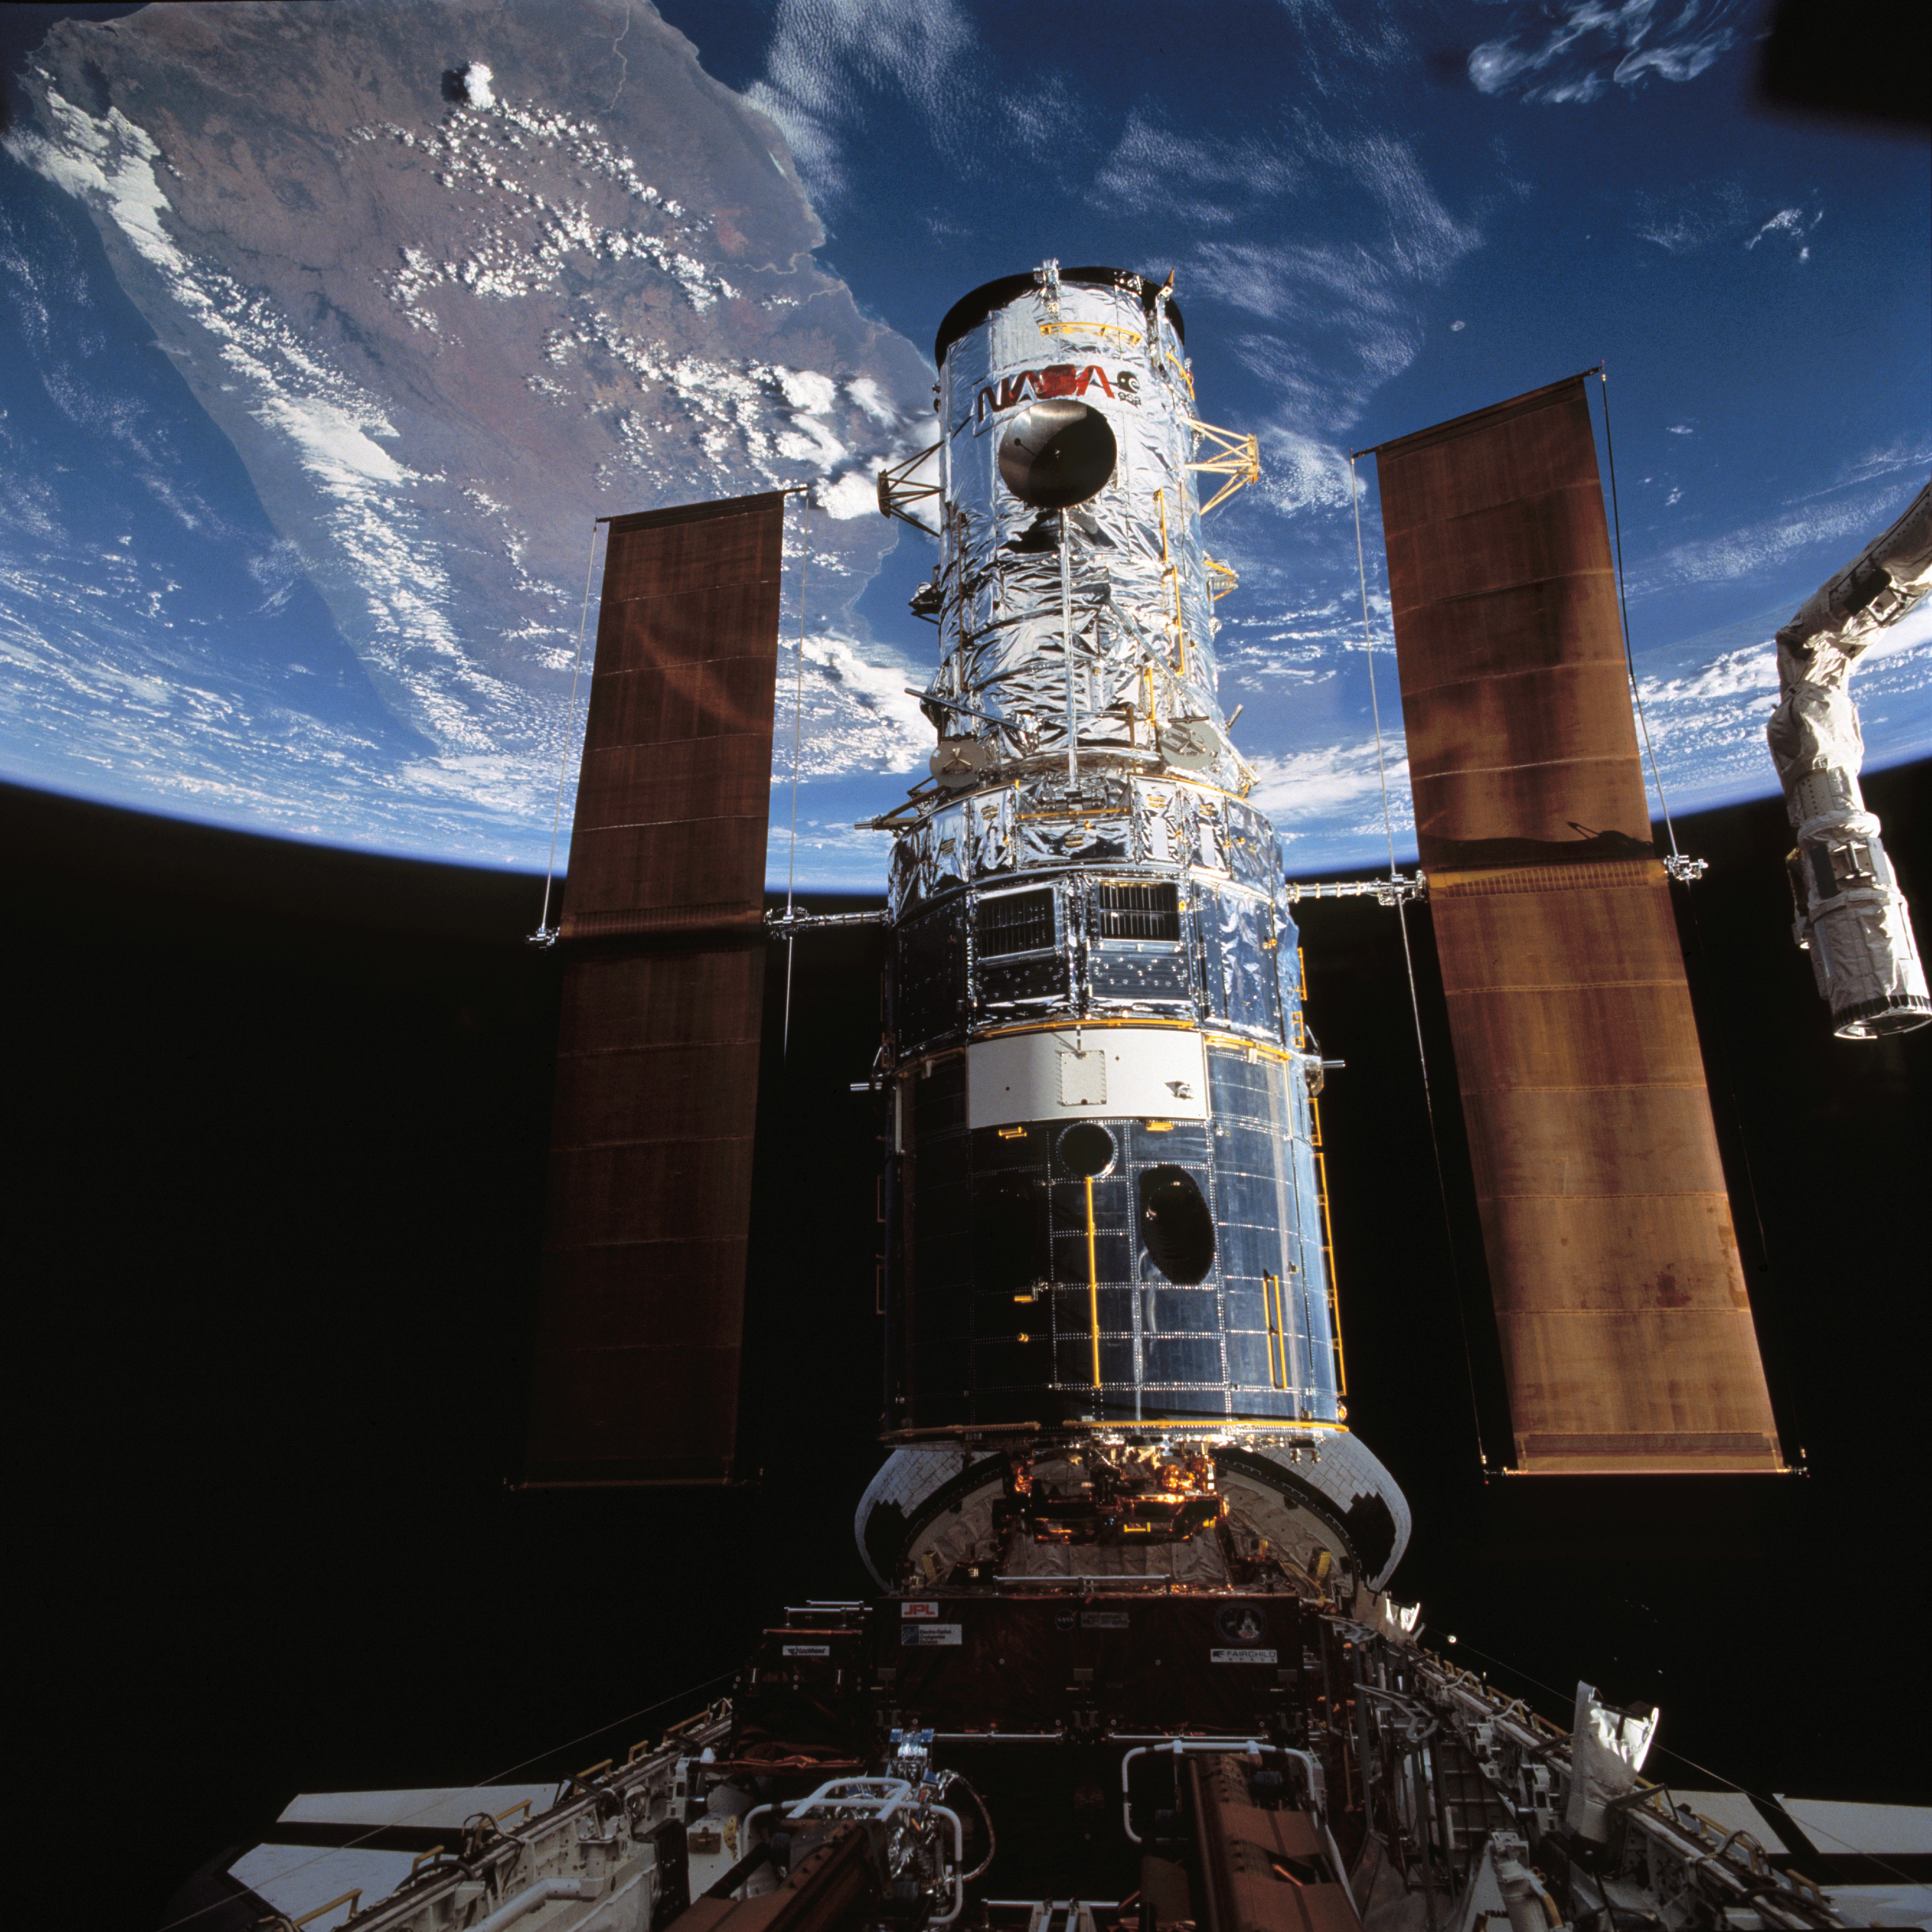 Hubble secured onto its flight support structure in Endeavour’s payload bay